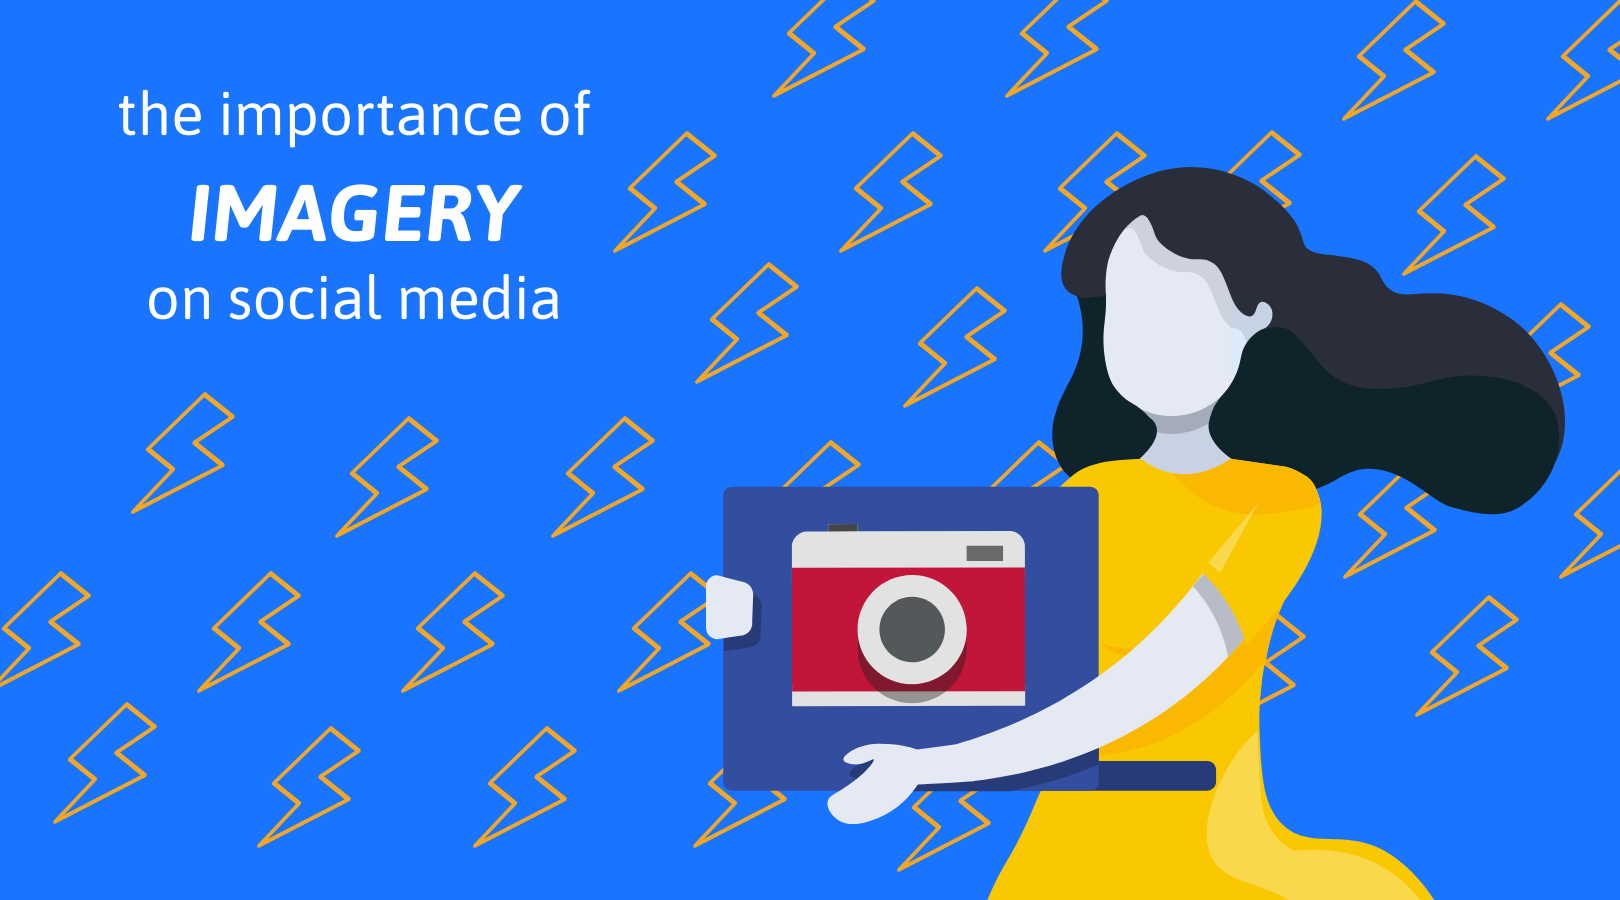 6 The importance of imagery on social media.